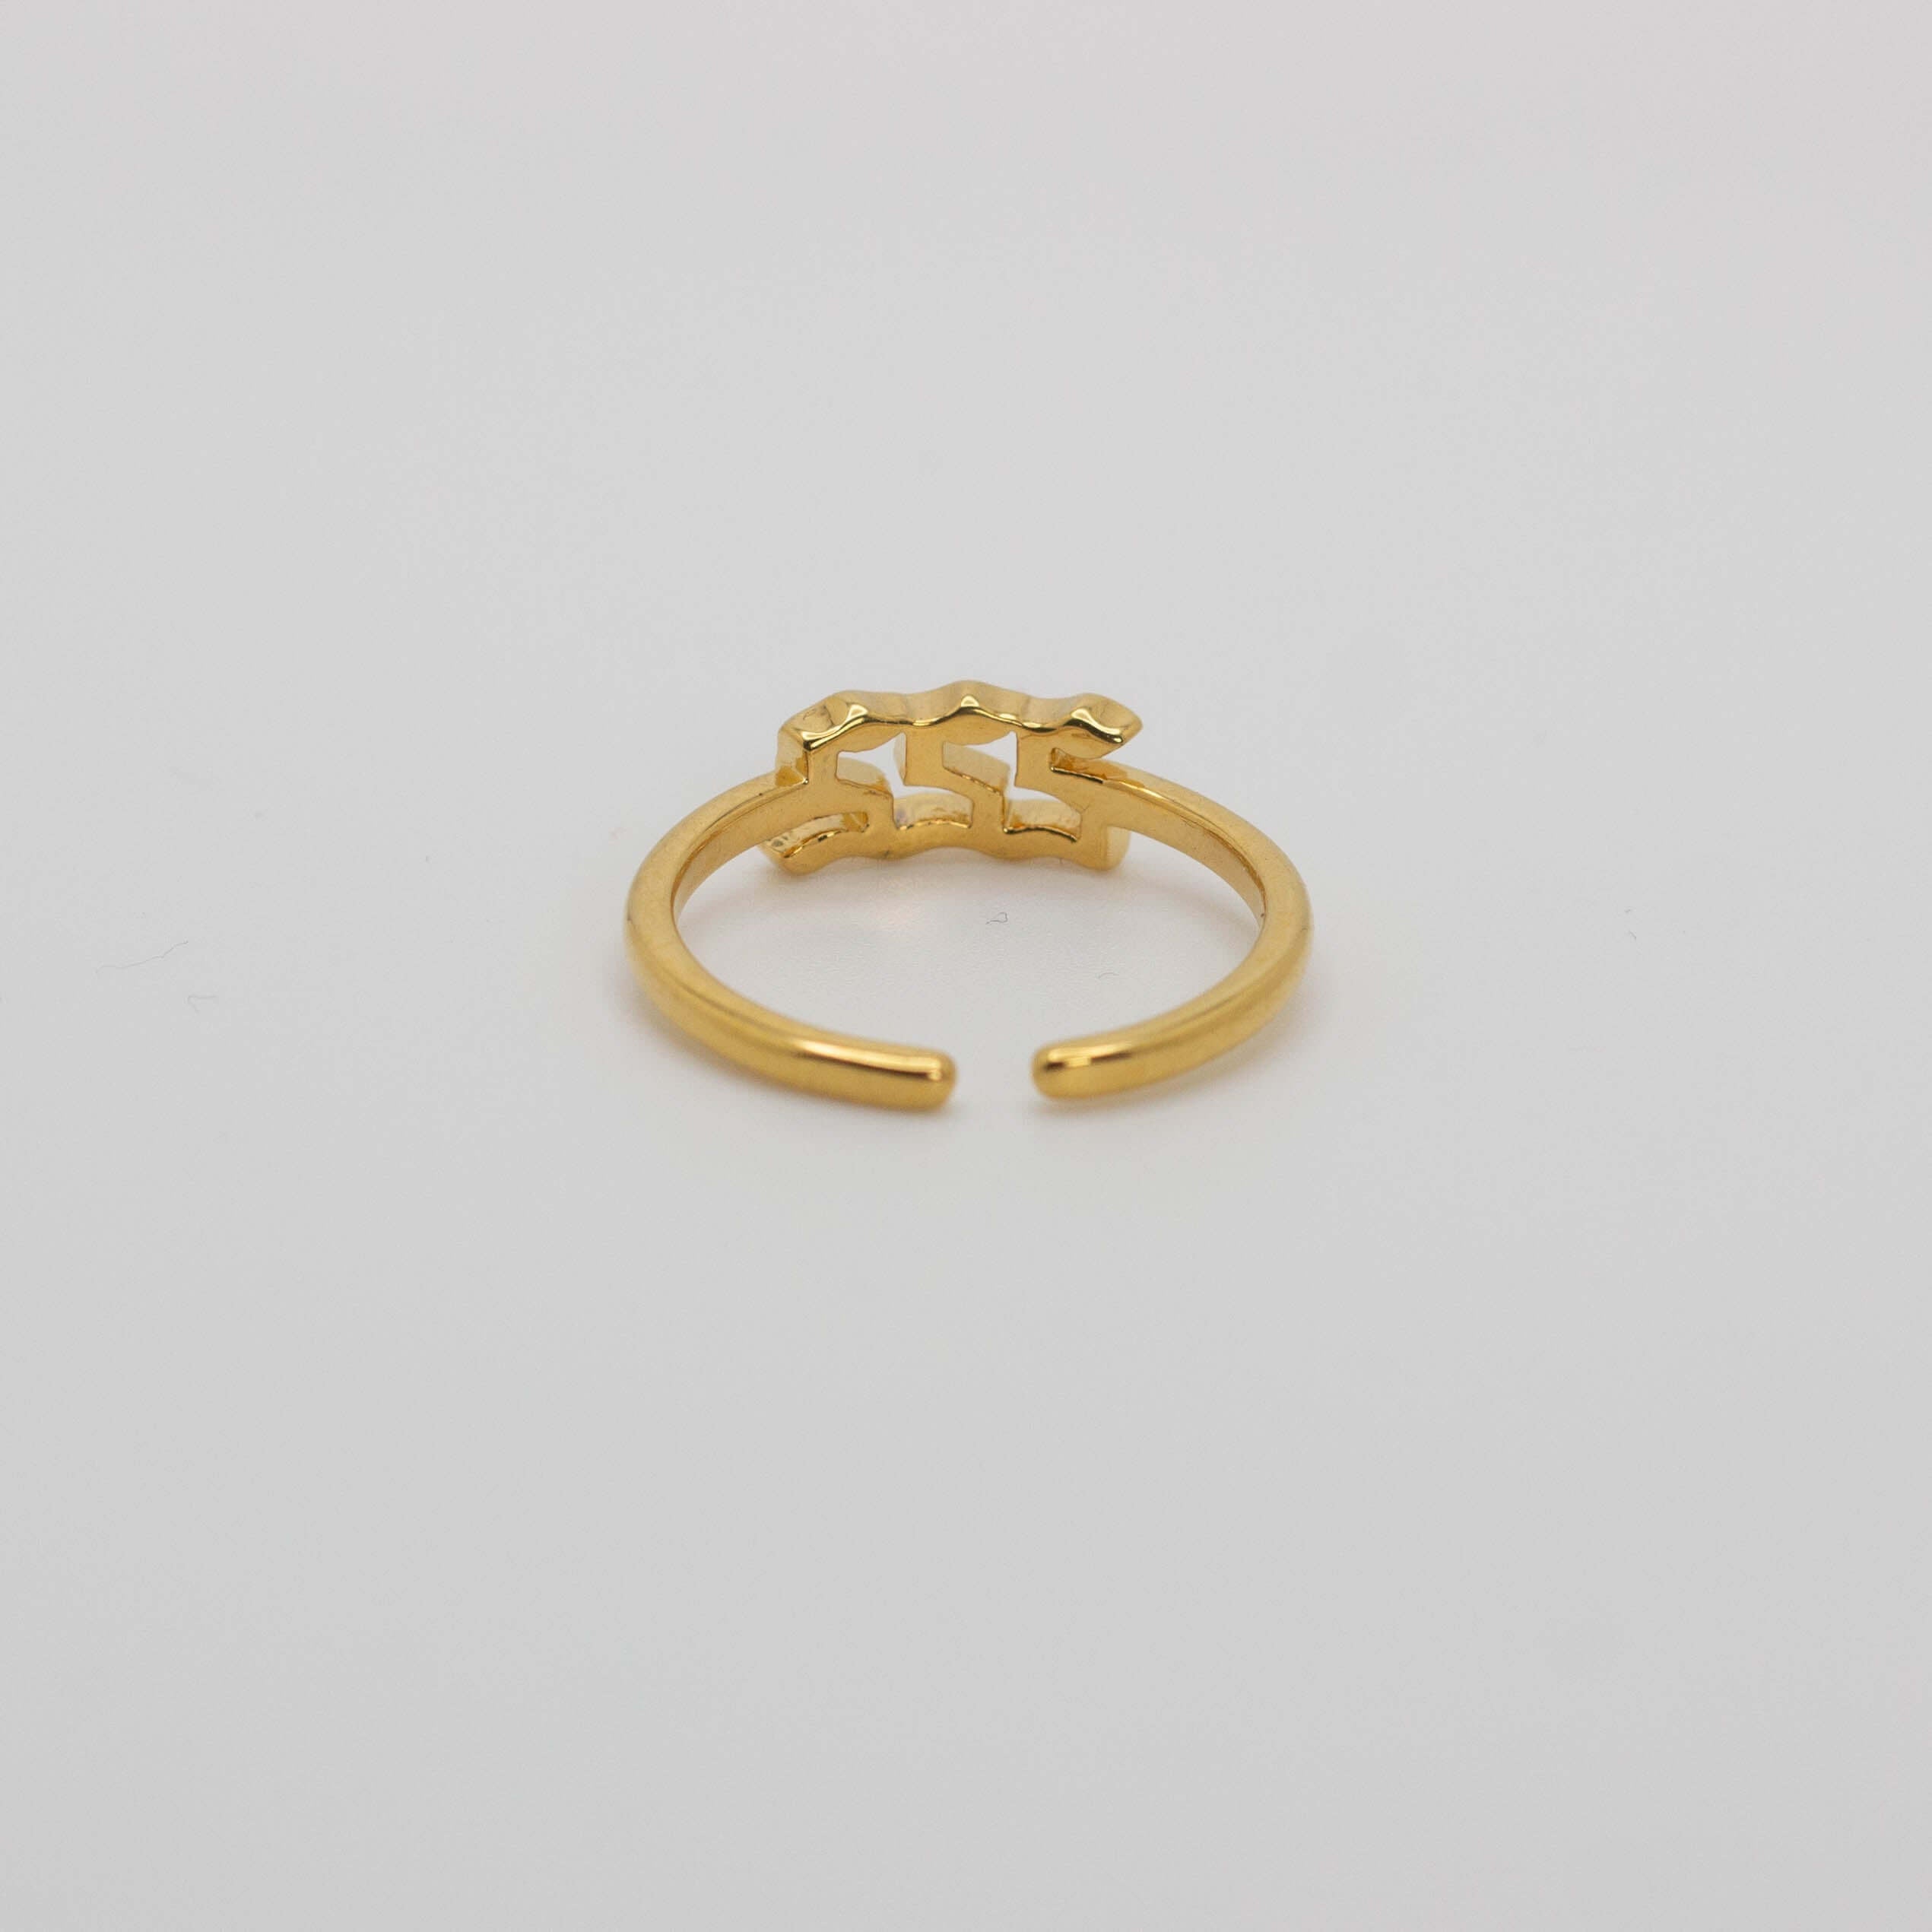 222 Angel Number Ring